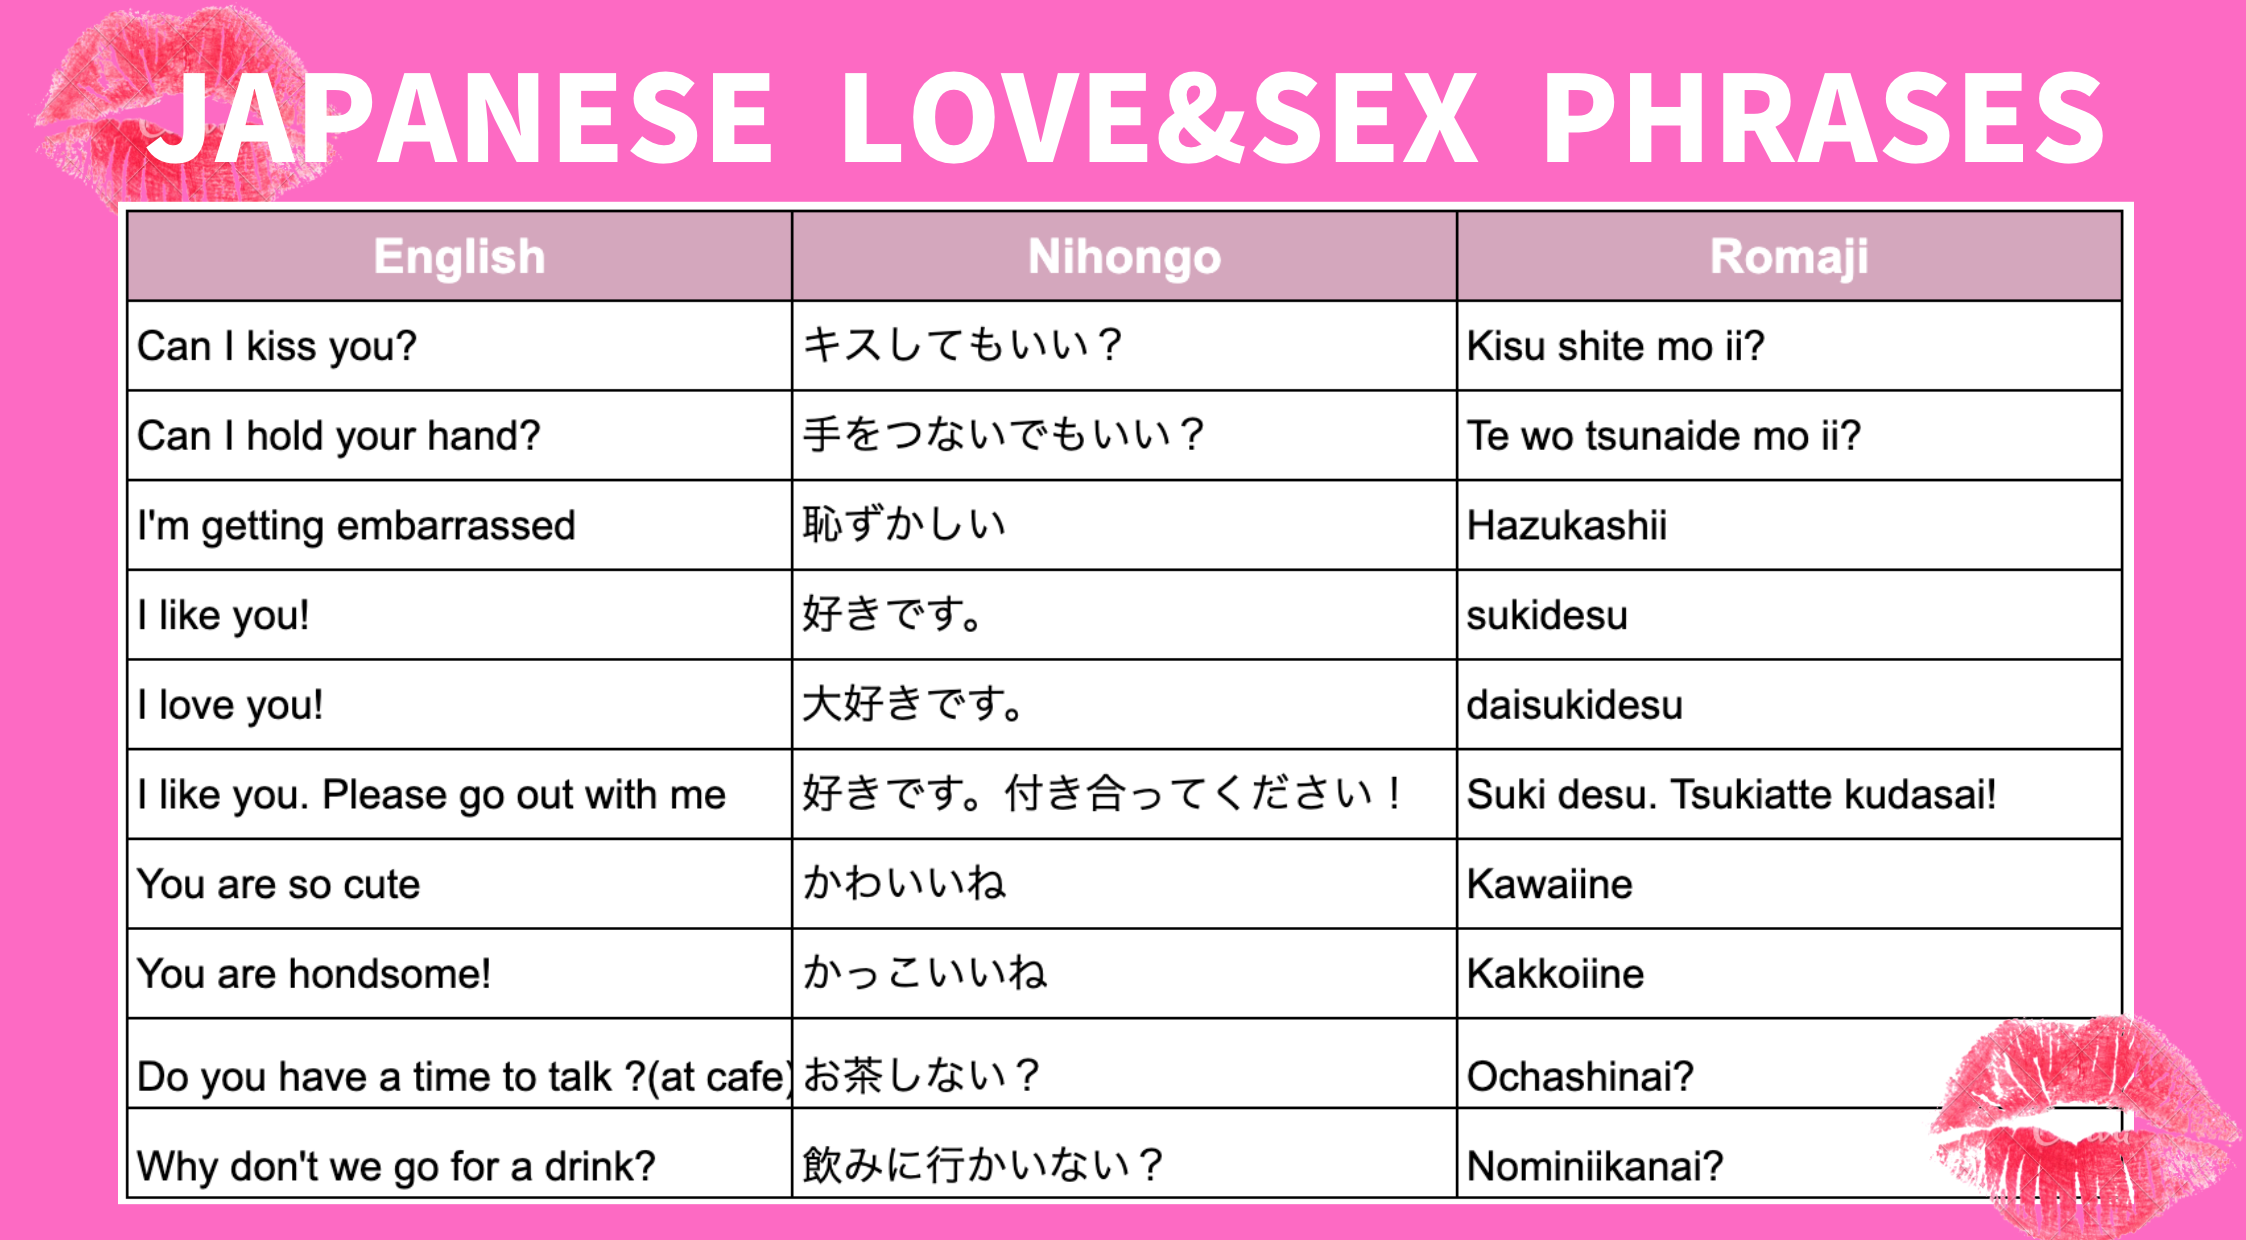 anna simonsson recommends how to say pussy in japanese pic